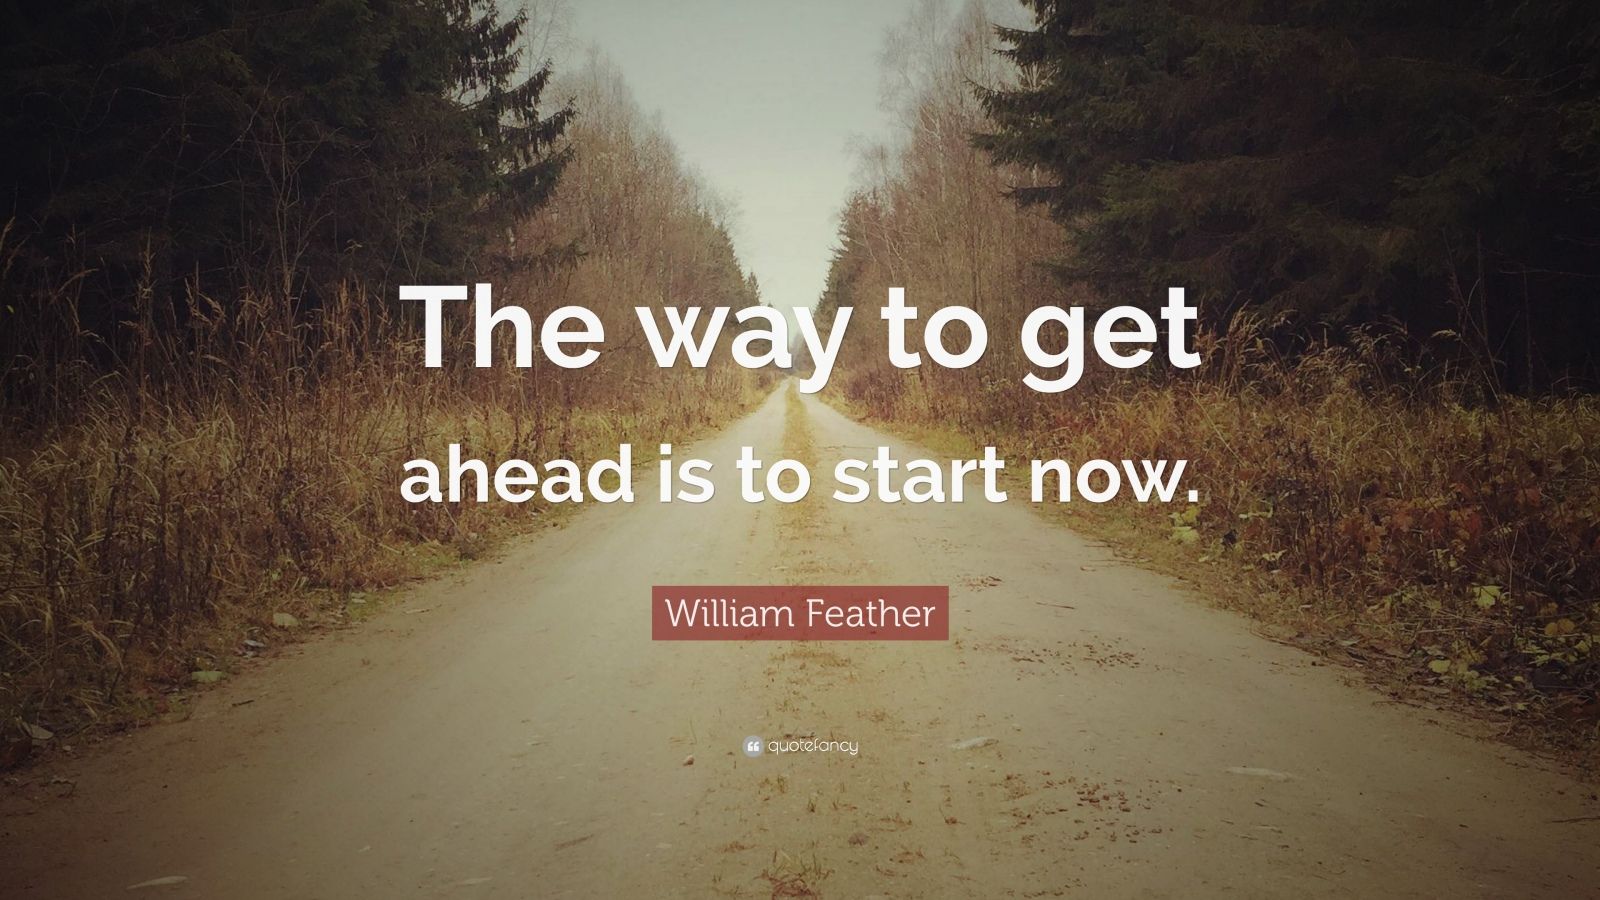 William Feather Quote: “The way to get ahead is to start now.” (12